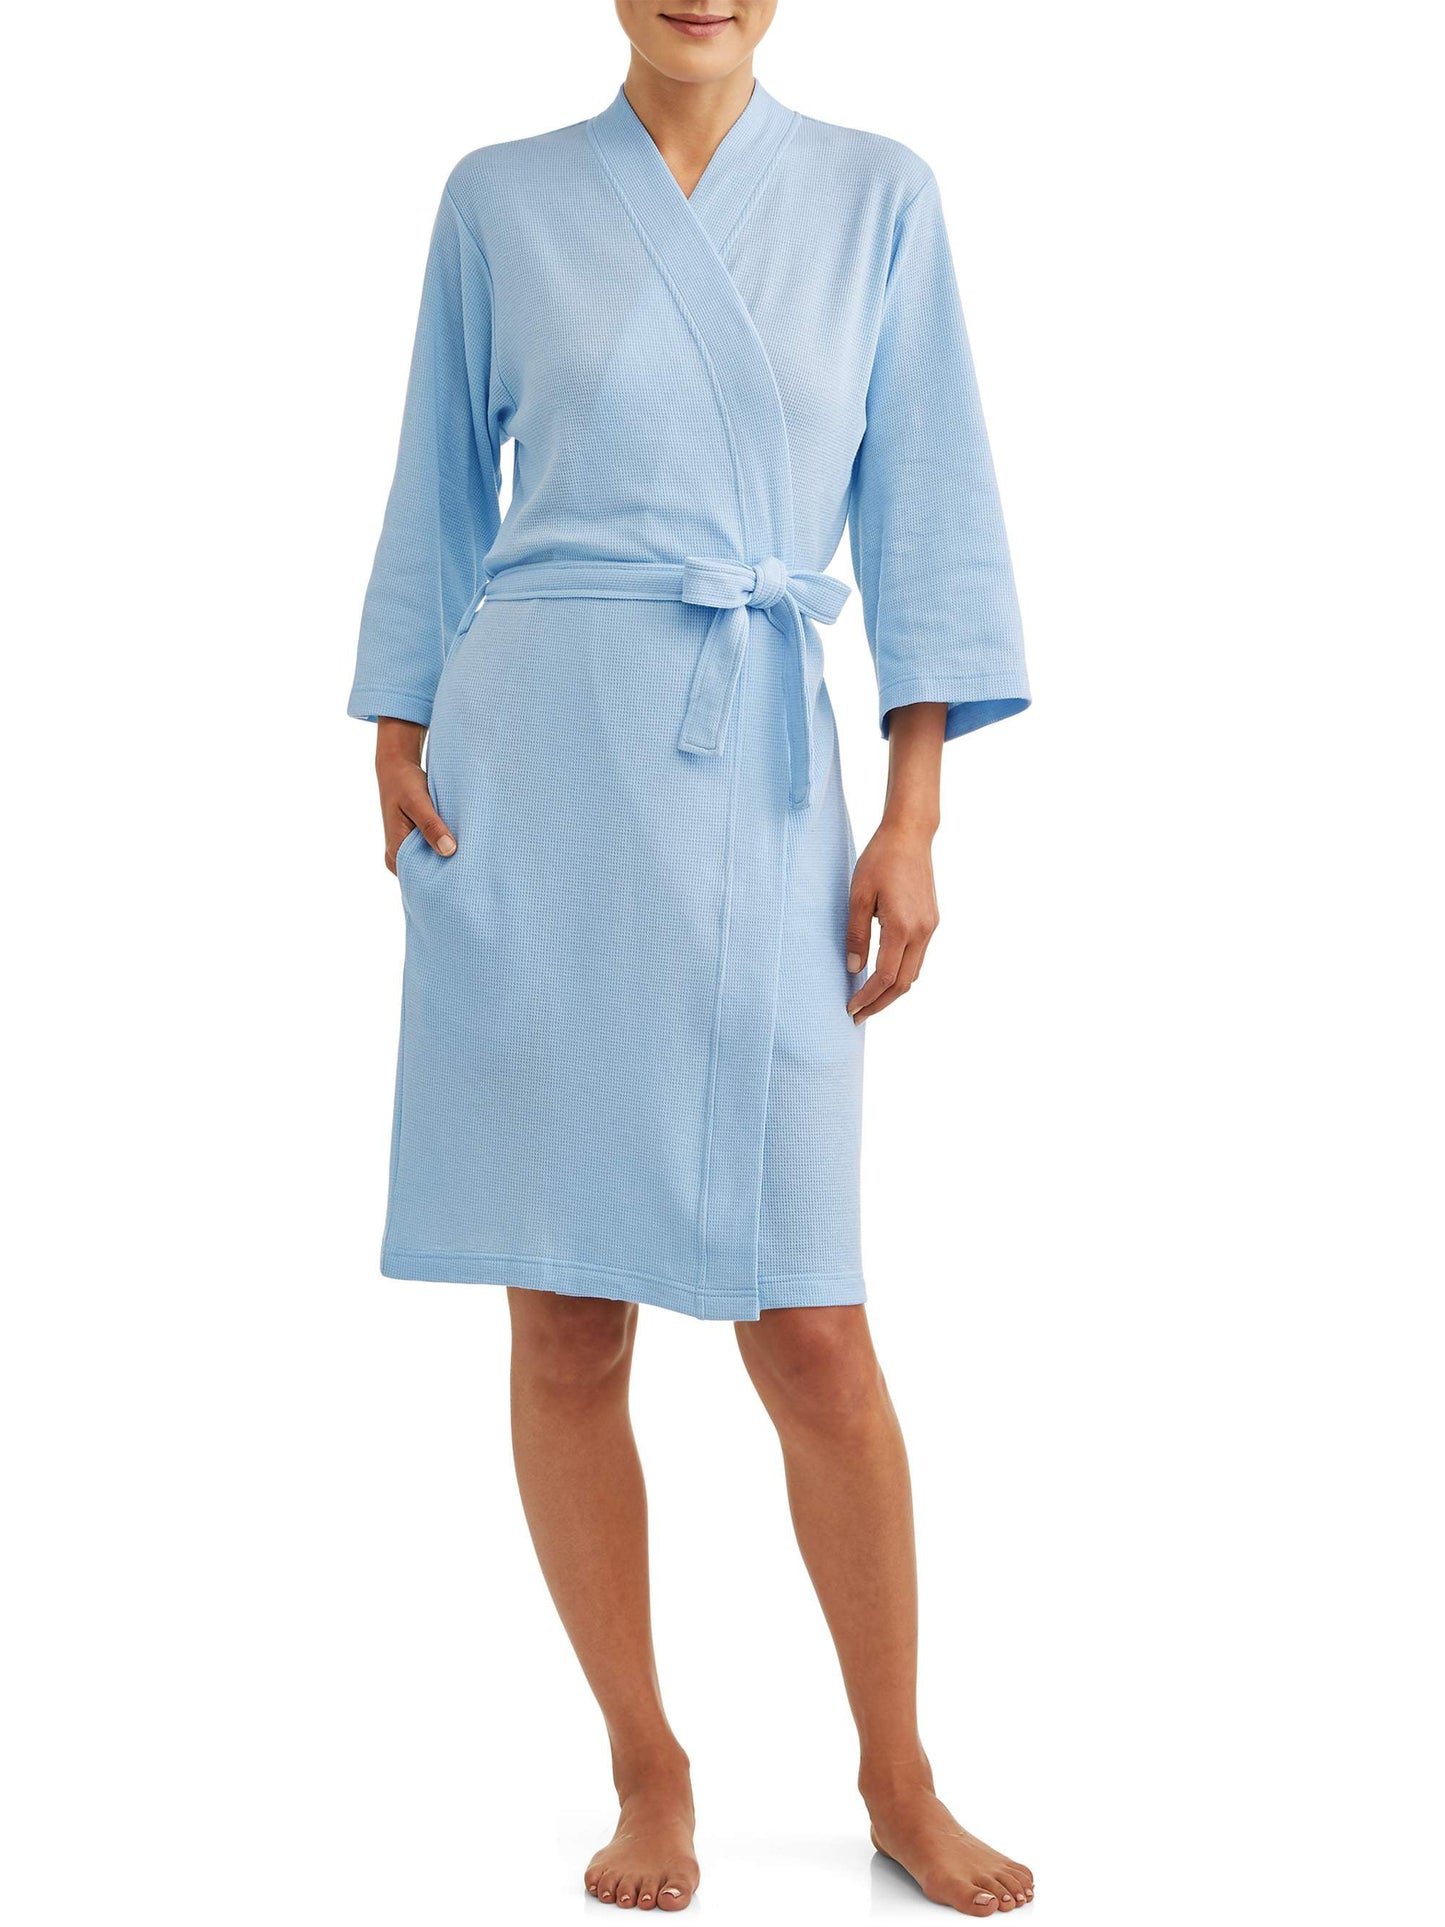 Lissome Women's and Women's Plus Waffle Wrap Robe